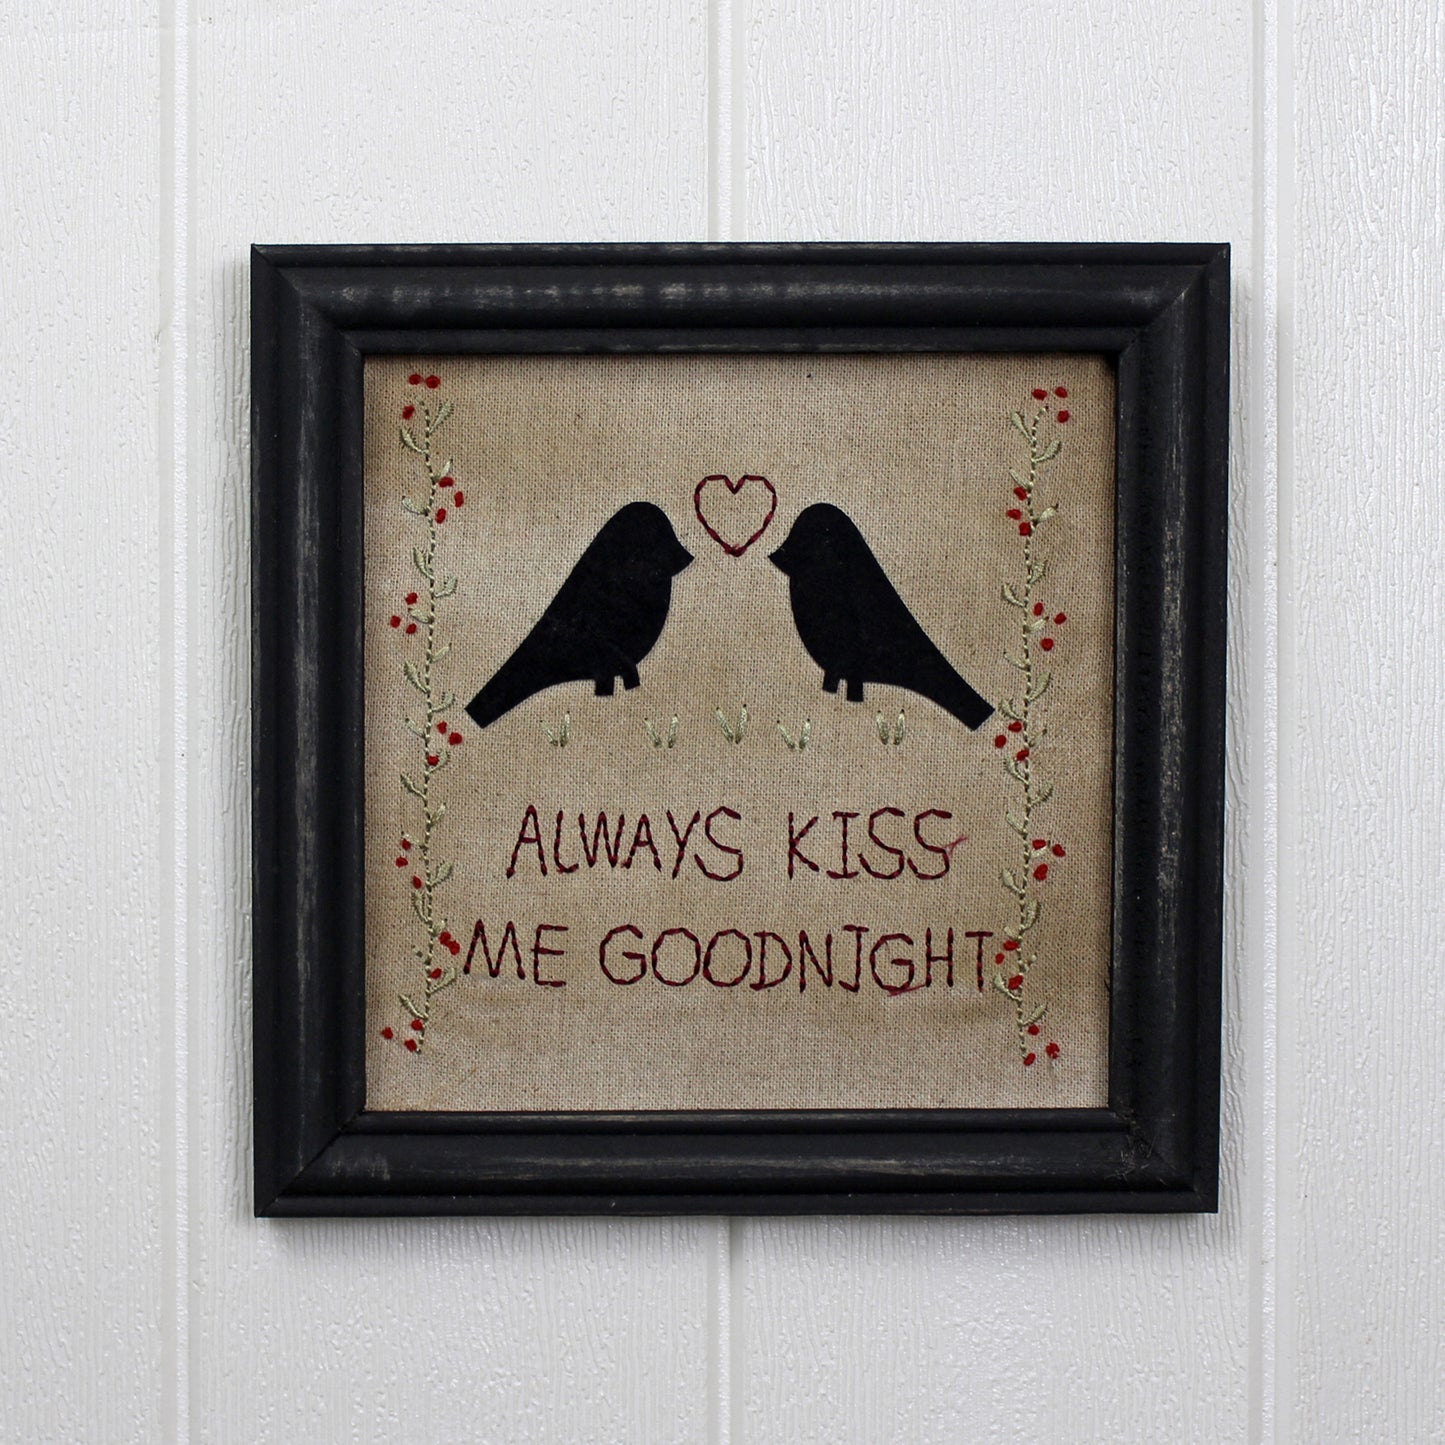 CVHOMEDECO. Primitives Antique Always Kiss Me Goodnight Stitchery Frame Wall Mounted Hanging Decor Art, 8 x 8 Inch